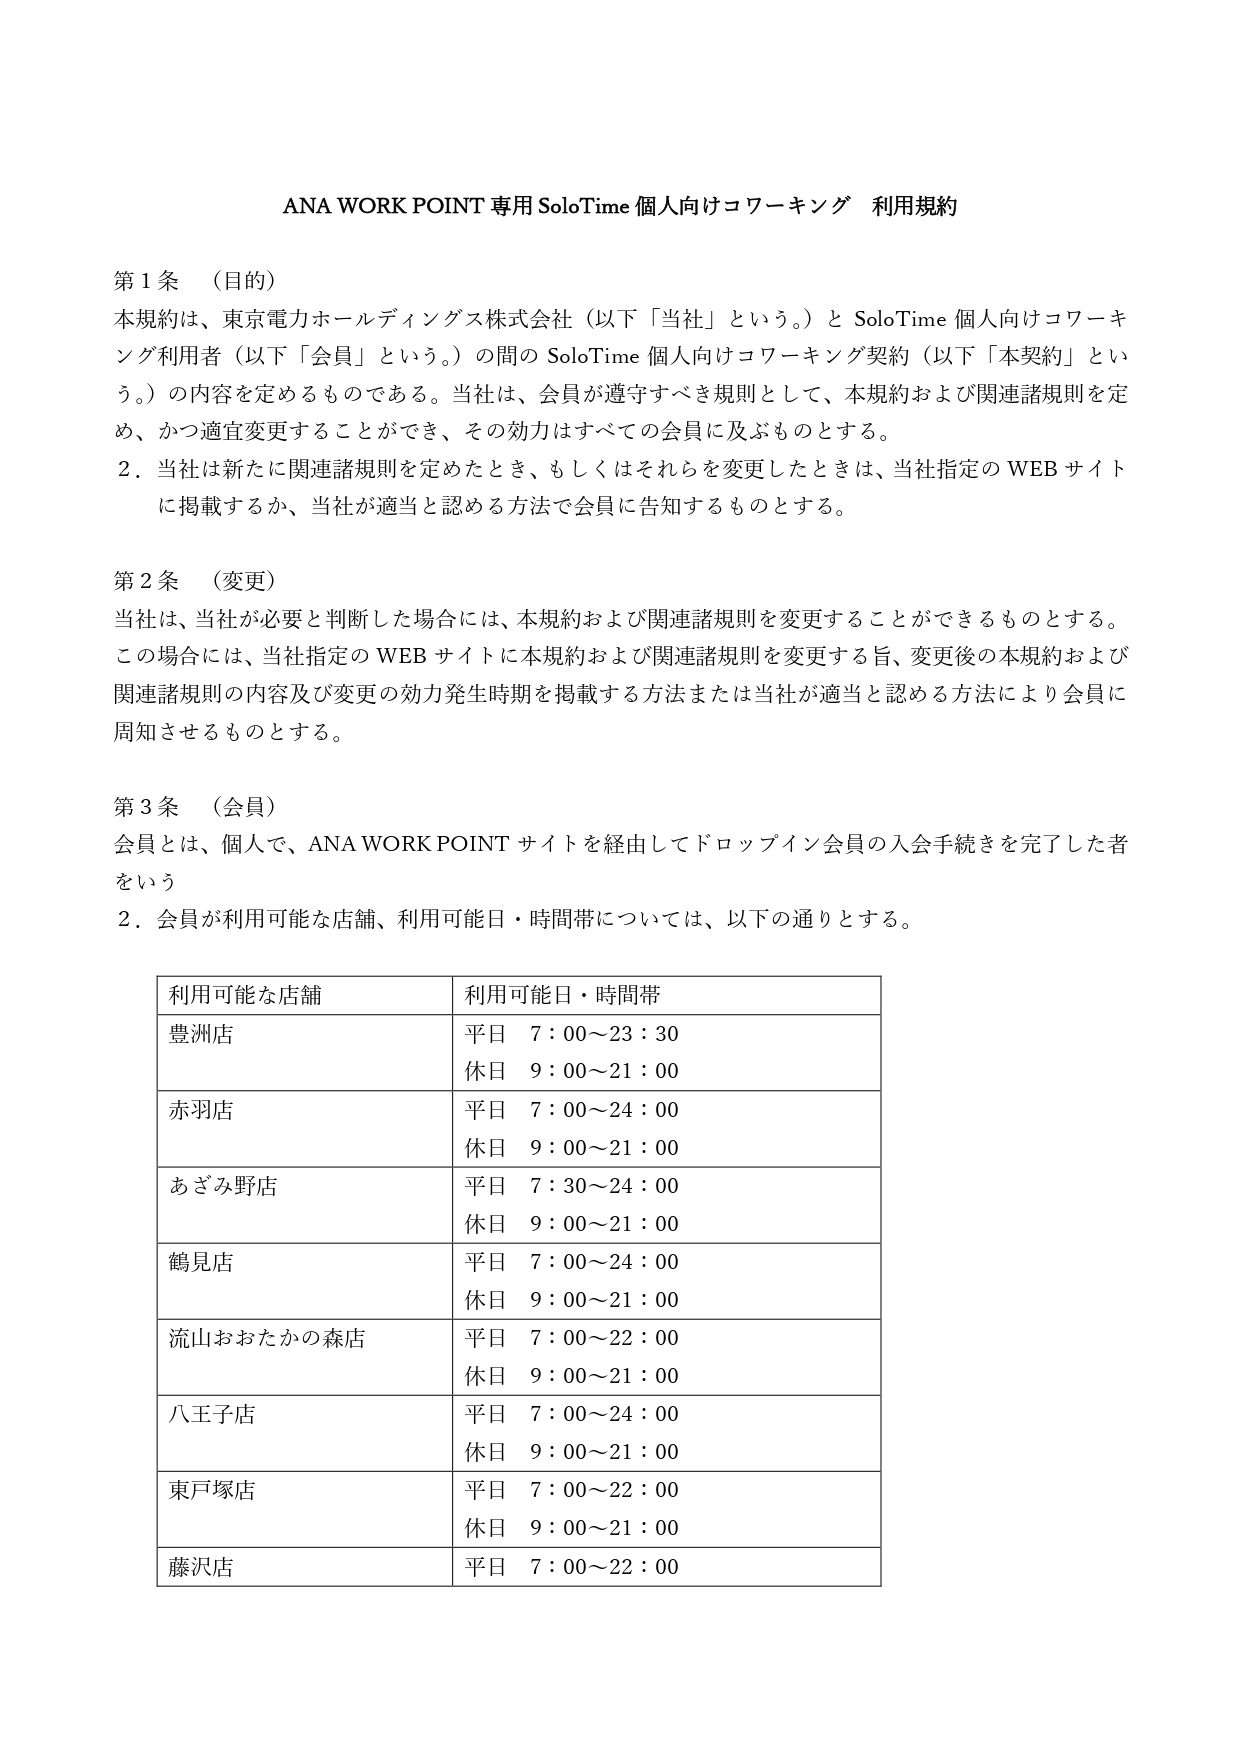 【FIX】ANA WORK POINT専用SoloTime利用規約_page-0001